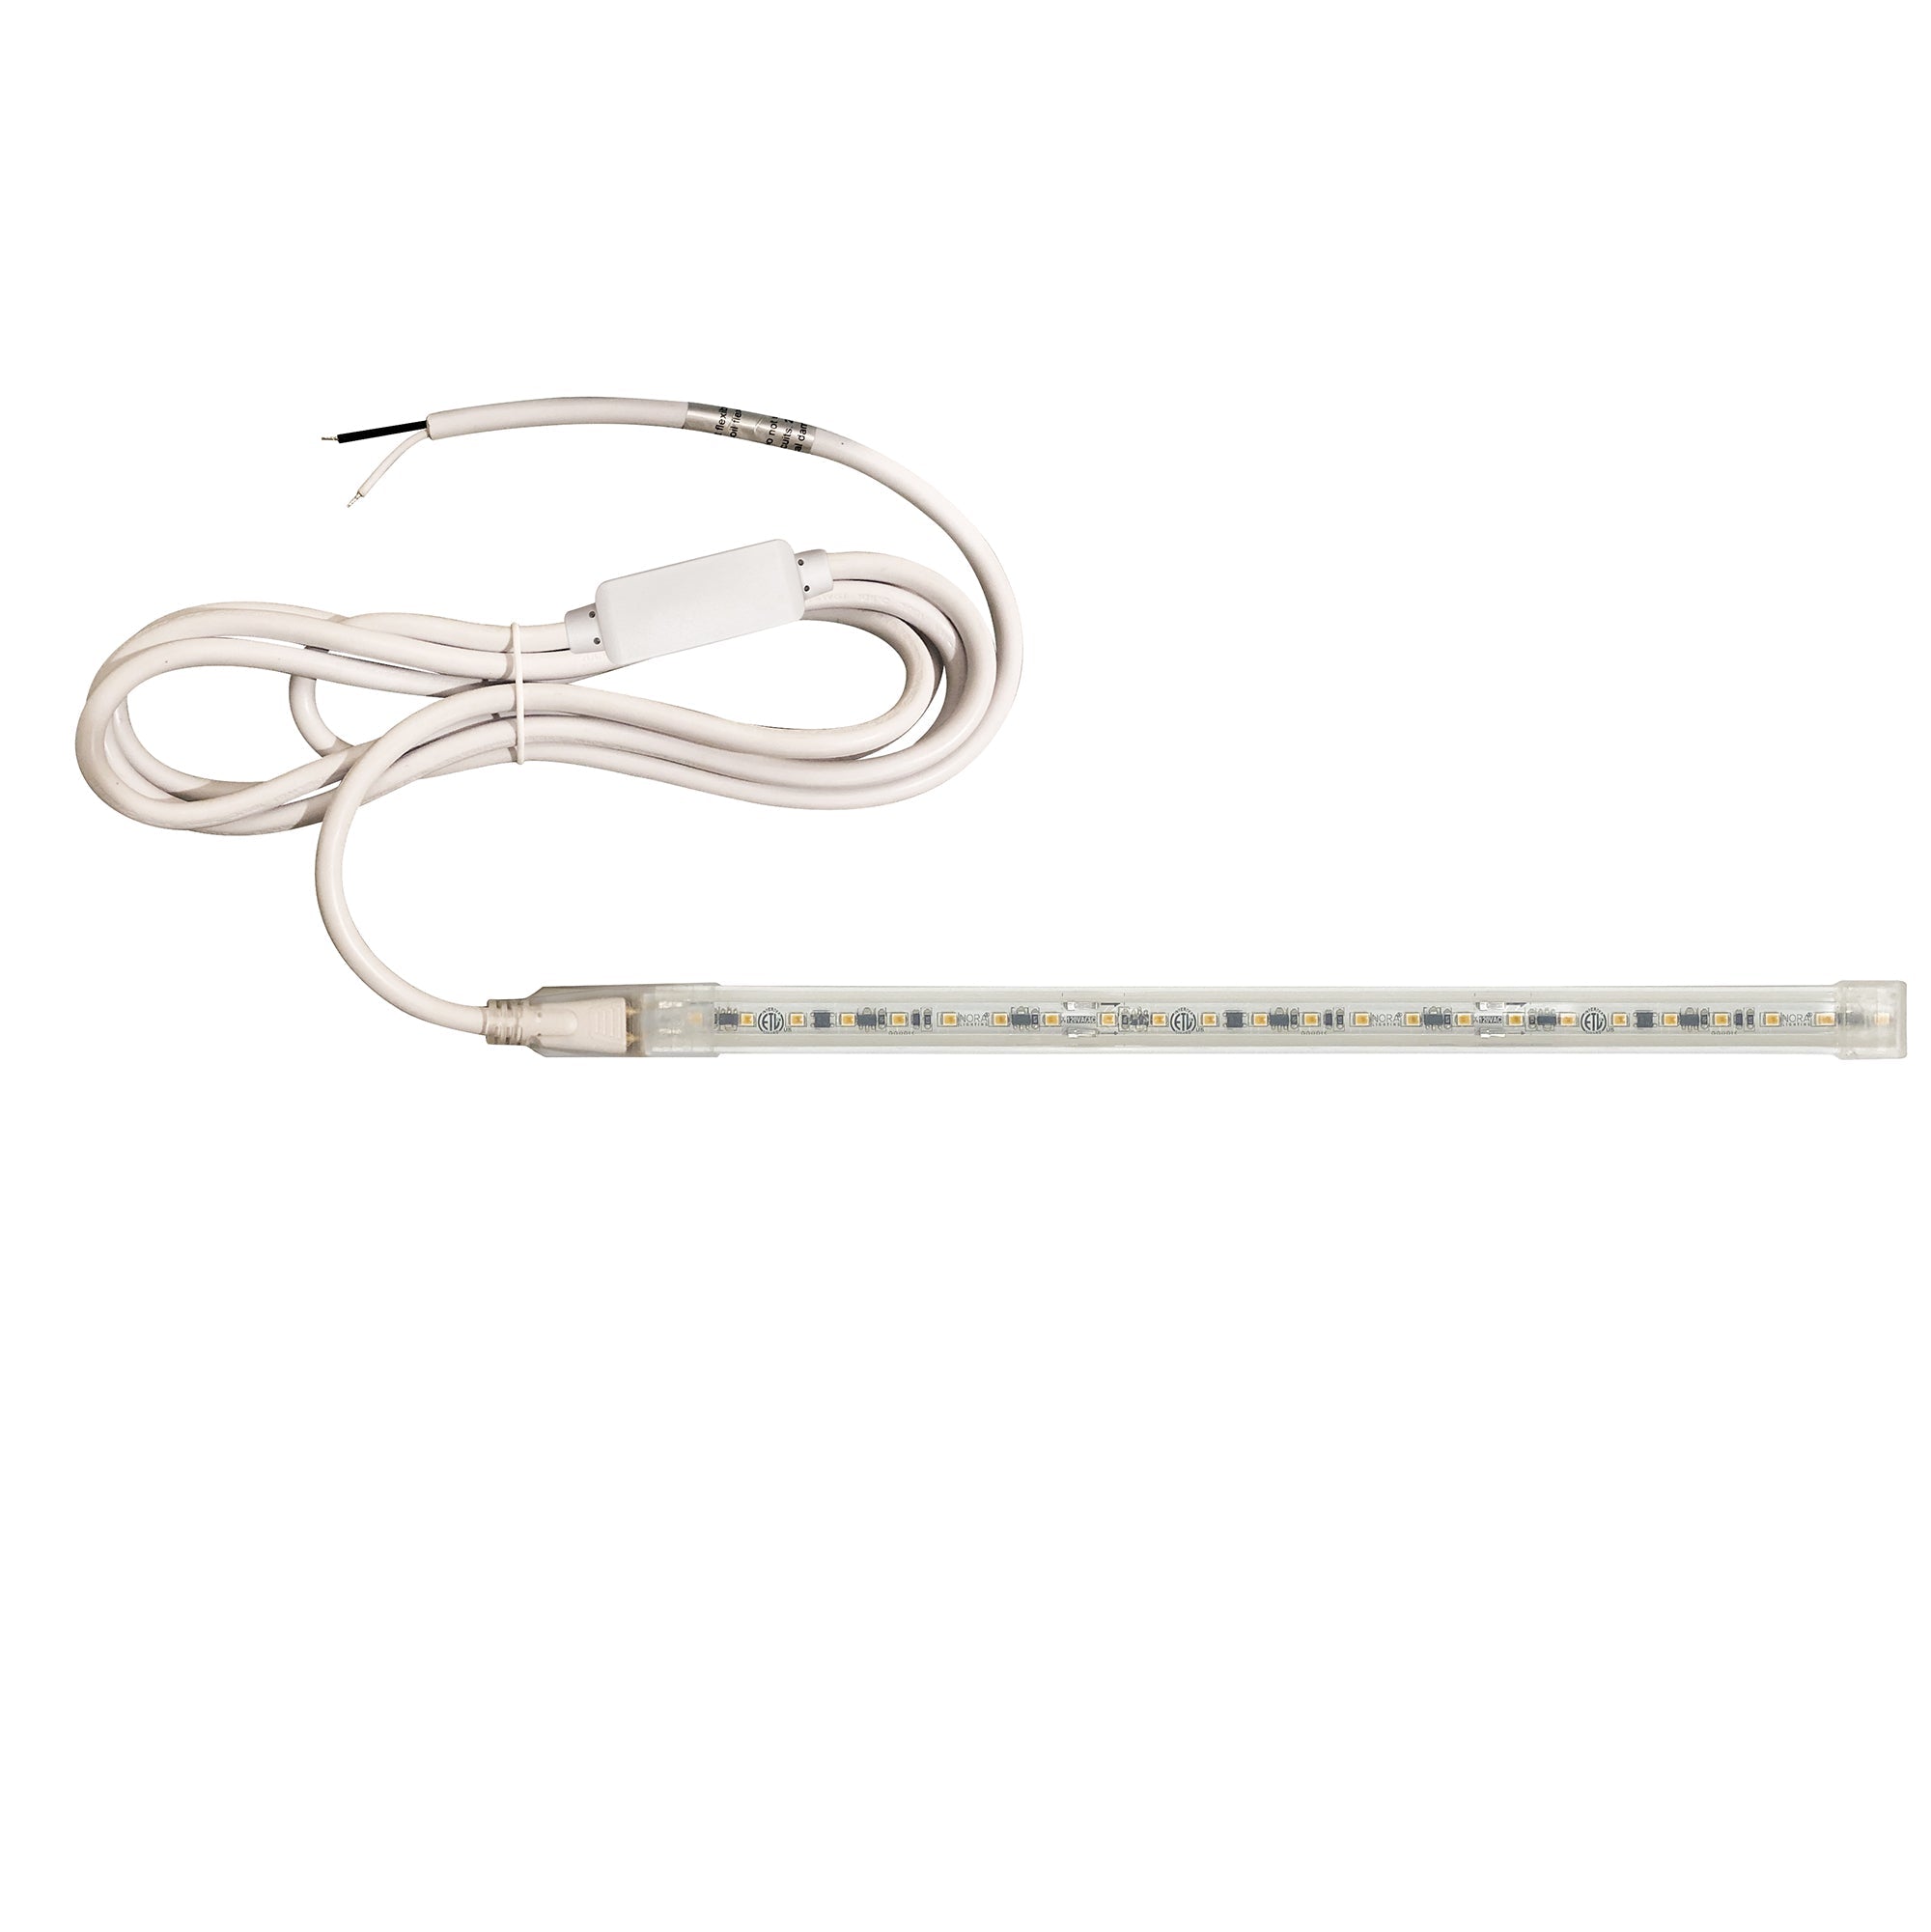 Nora Lighting NUTP13-W7-4-12-930/HWSP - Accent / Undercabinet - Custom Cut 7-ft, 4-in 120V Continuous LED Tape Light, 330lm / 3.6W per foot, 3000K, w/ Mounting Clips and 8' Hardwired Power Cord w/ Surge Protector